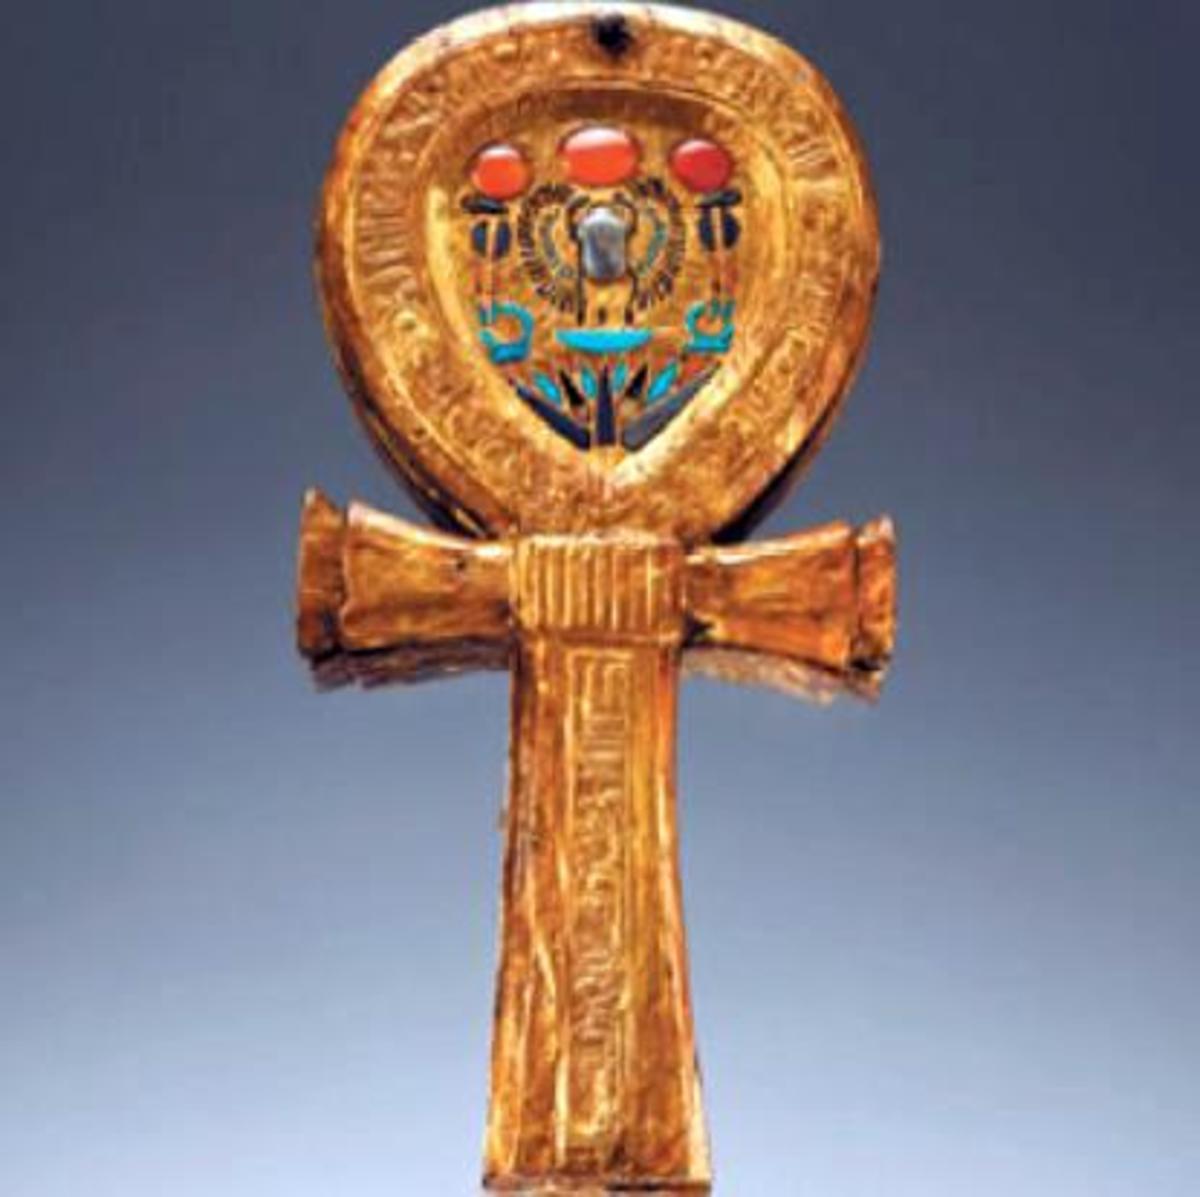 Ancient Egyptian Jewelry - Why Choose Ankh Jewelry